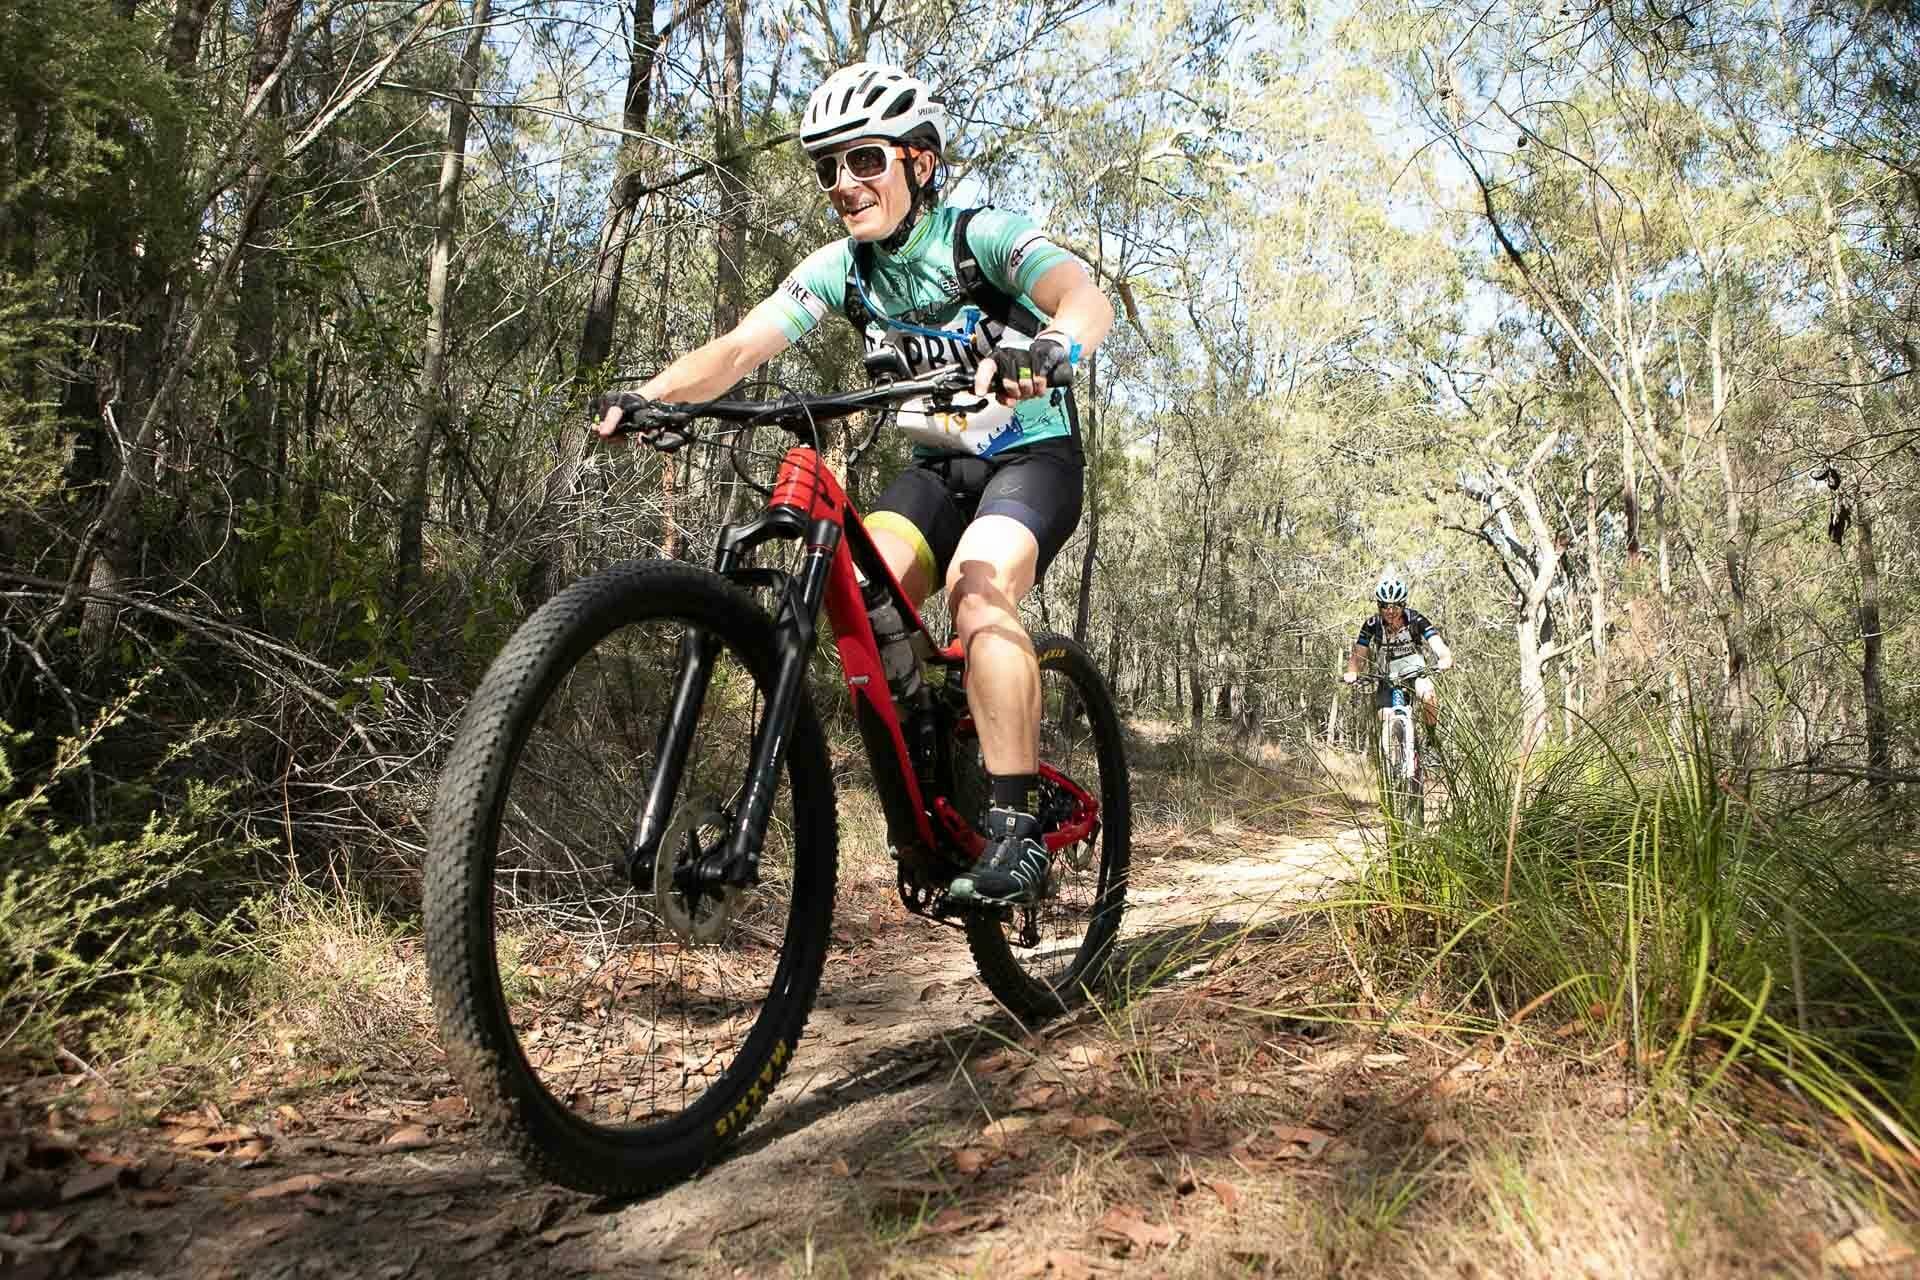 Enter the Lake Mac Adventure Race and Start 2021 Right, outer image collective, mountain bike